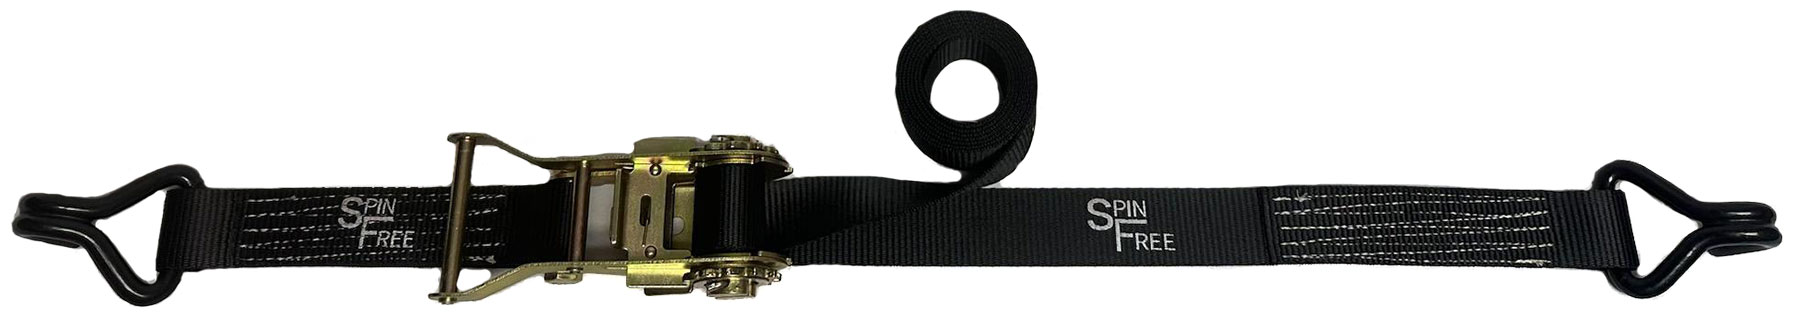 1 1/2" SPIN FREE Heavy Duty Ratchet Strap with Coated Wire Hooks